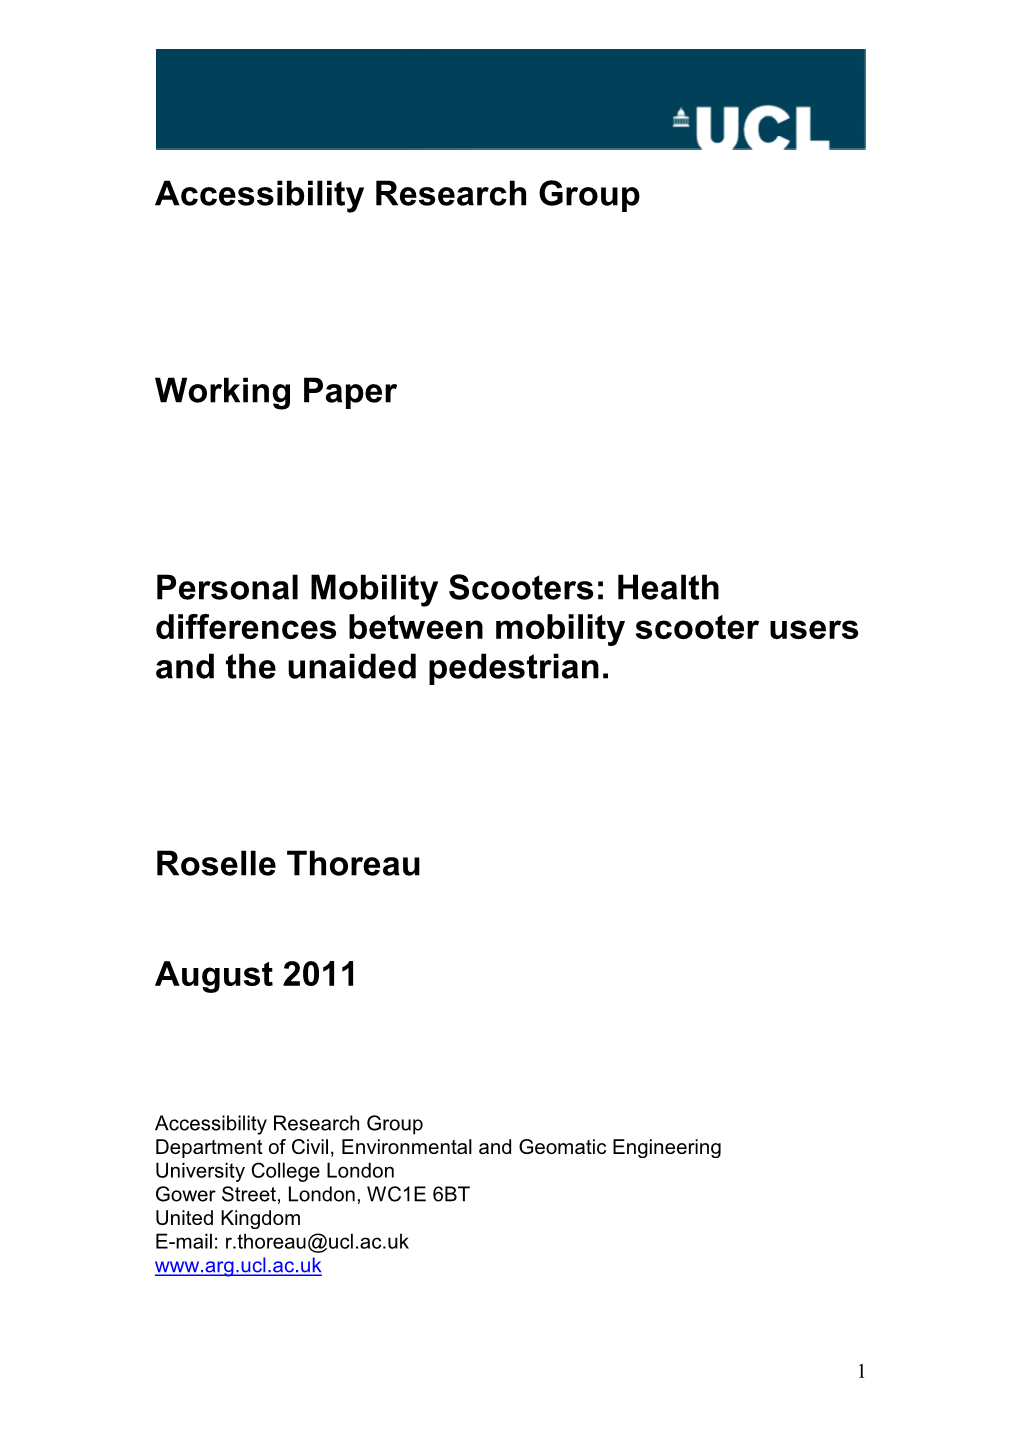 Health Differences Between Mobility Scooter Users and the Unaided Pedestrian